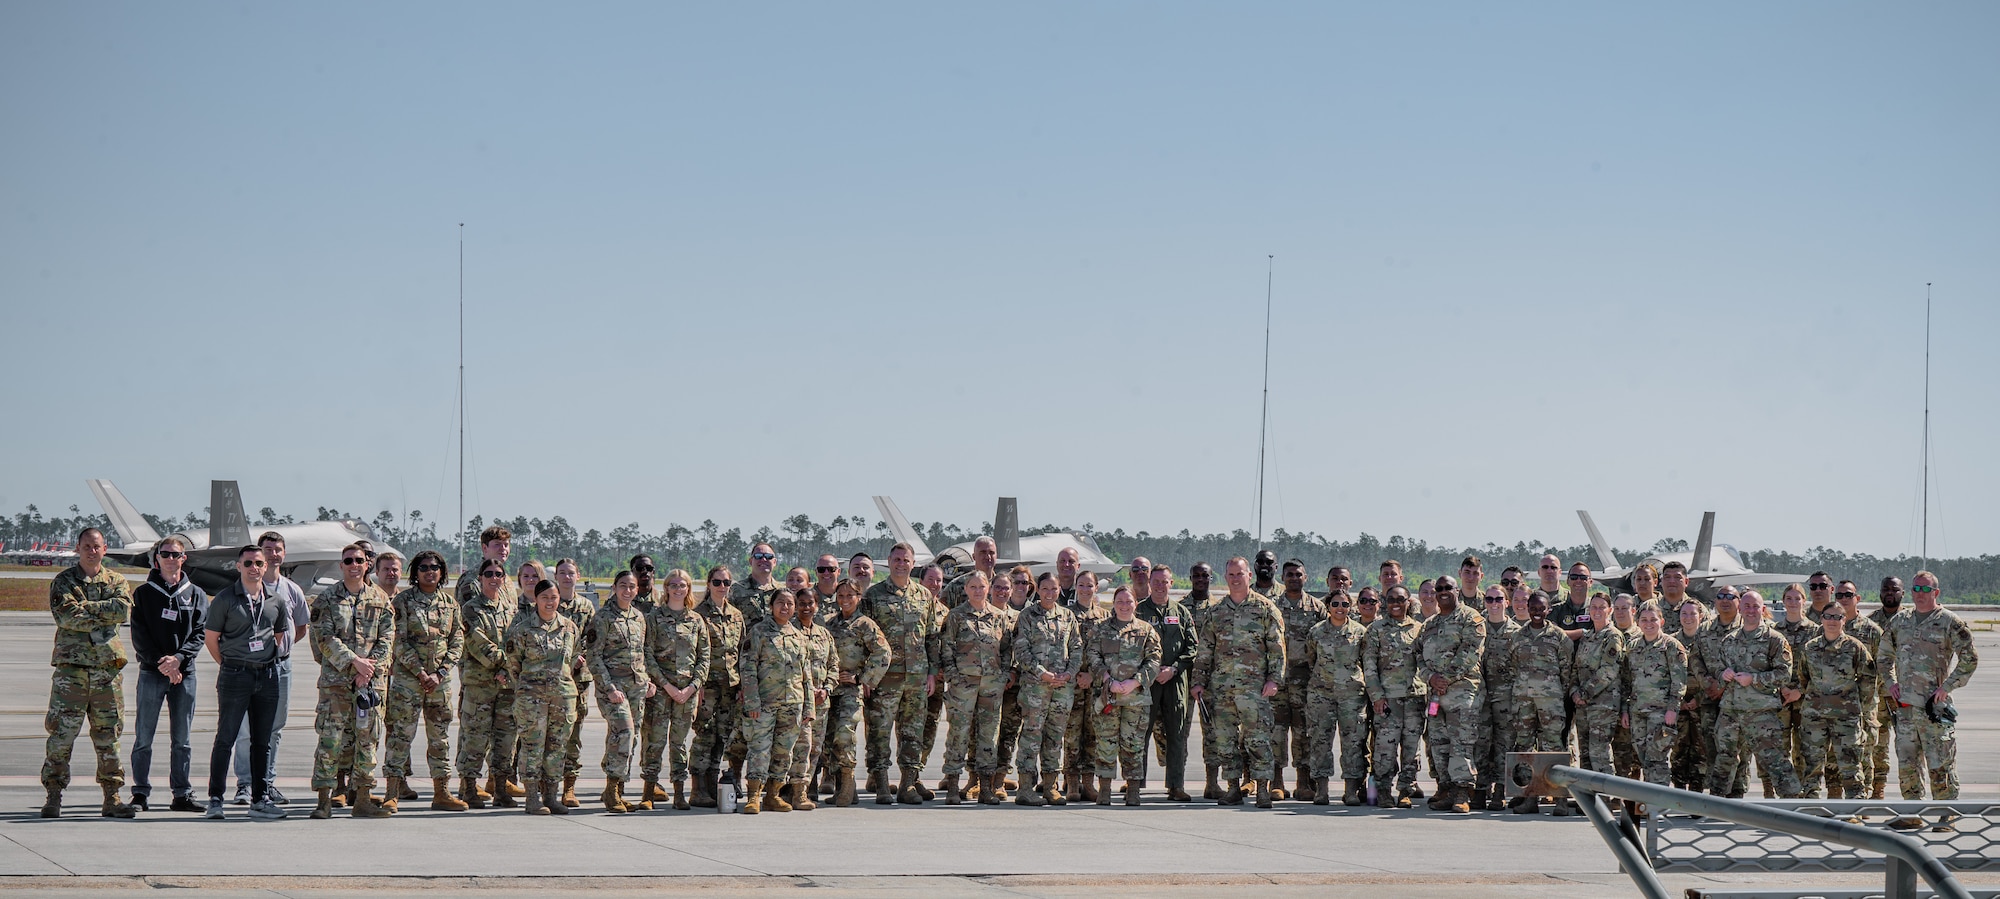 Airmen line up for a photo